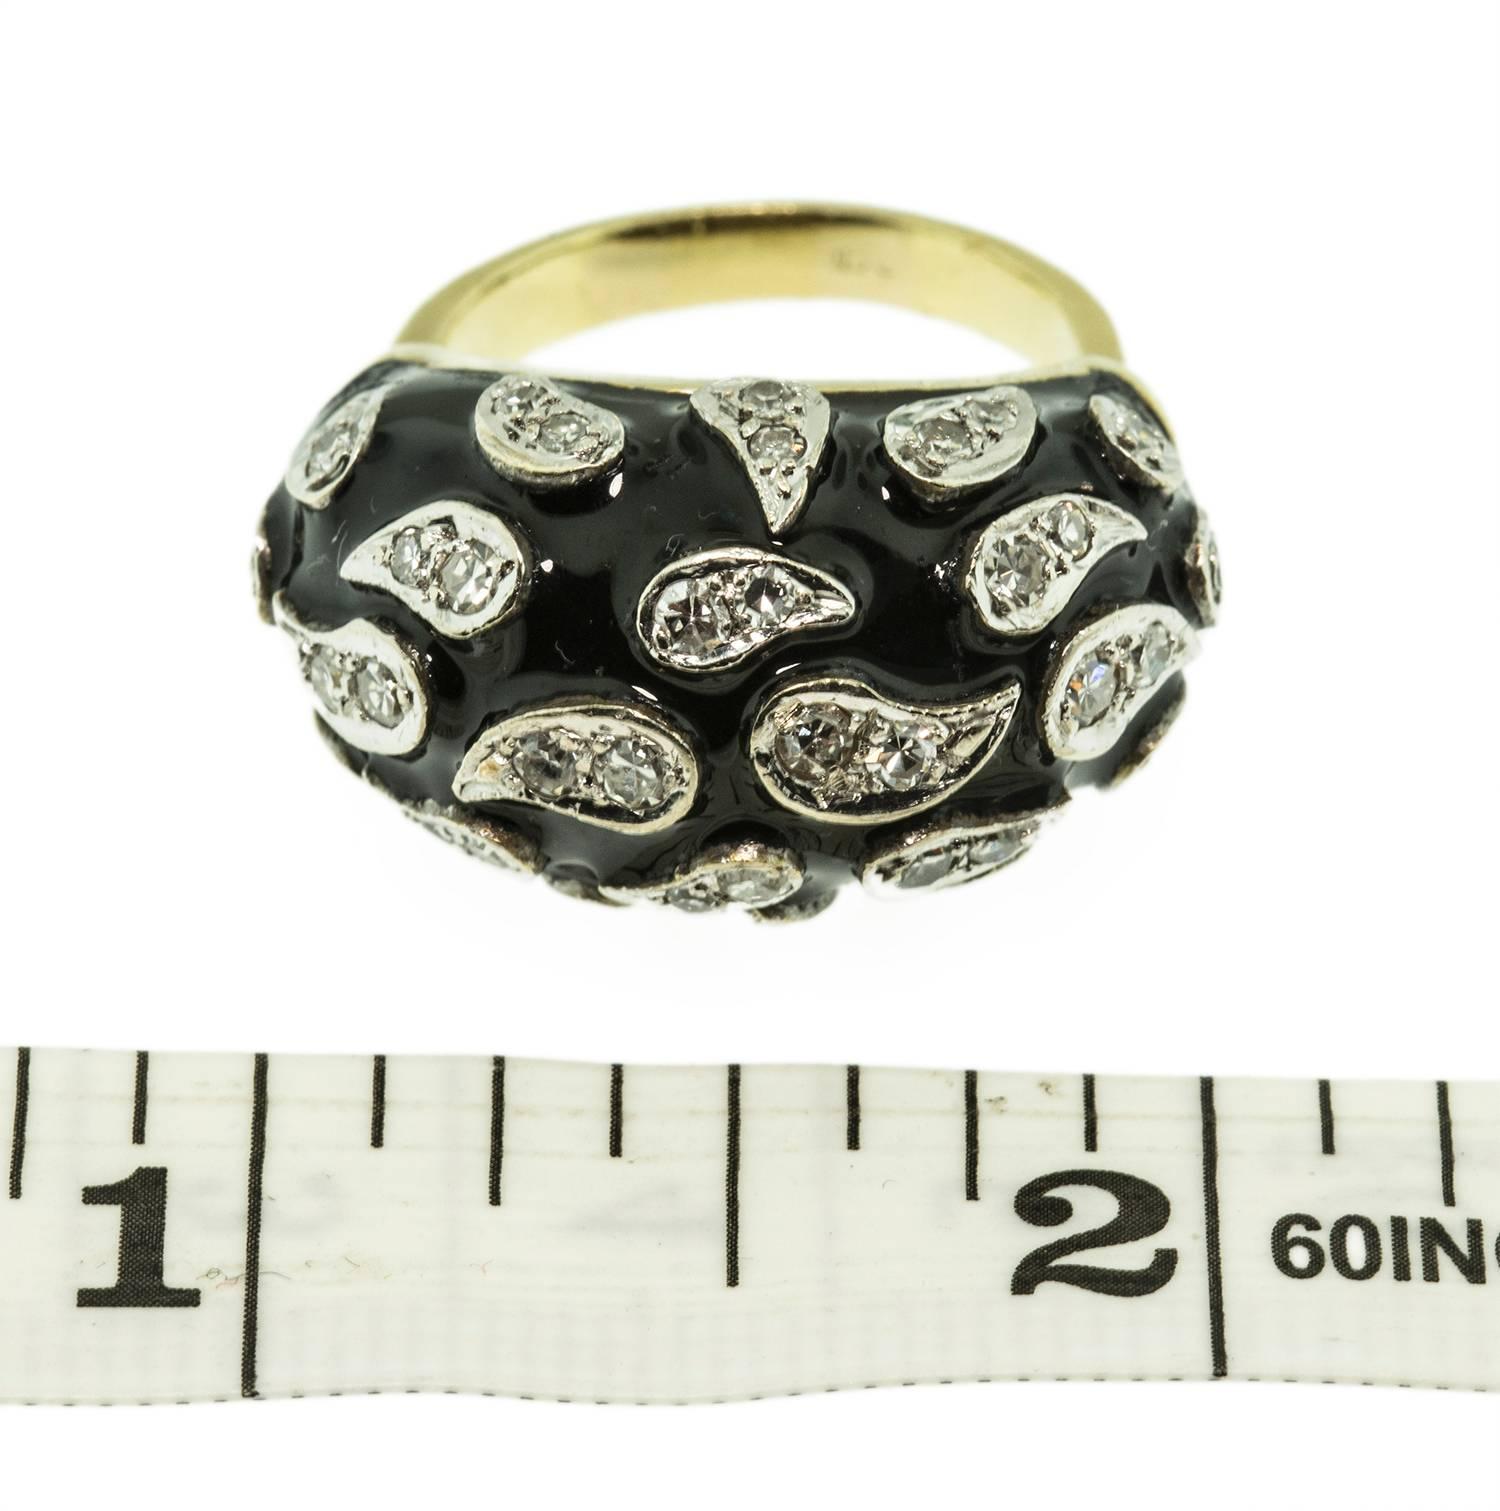 This custom made ring is set in 18k yellow gold. It holds thirty eight, round, single cut diamonds. F-I colour, VS-I1 clarity, set in stylized teardrops on a black enamel background. The high dome creates a dramatic avant-garde effect. This ring is